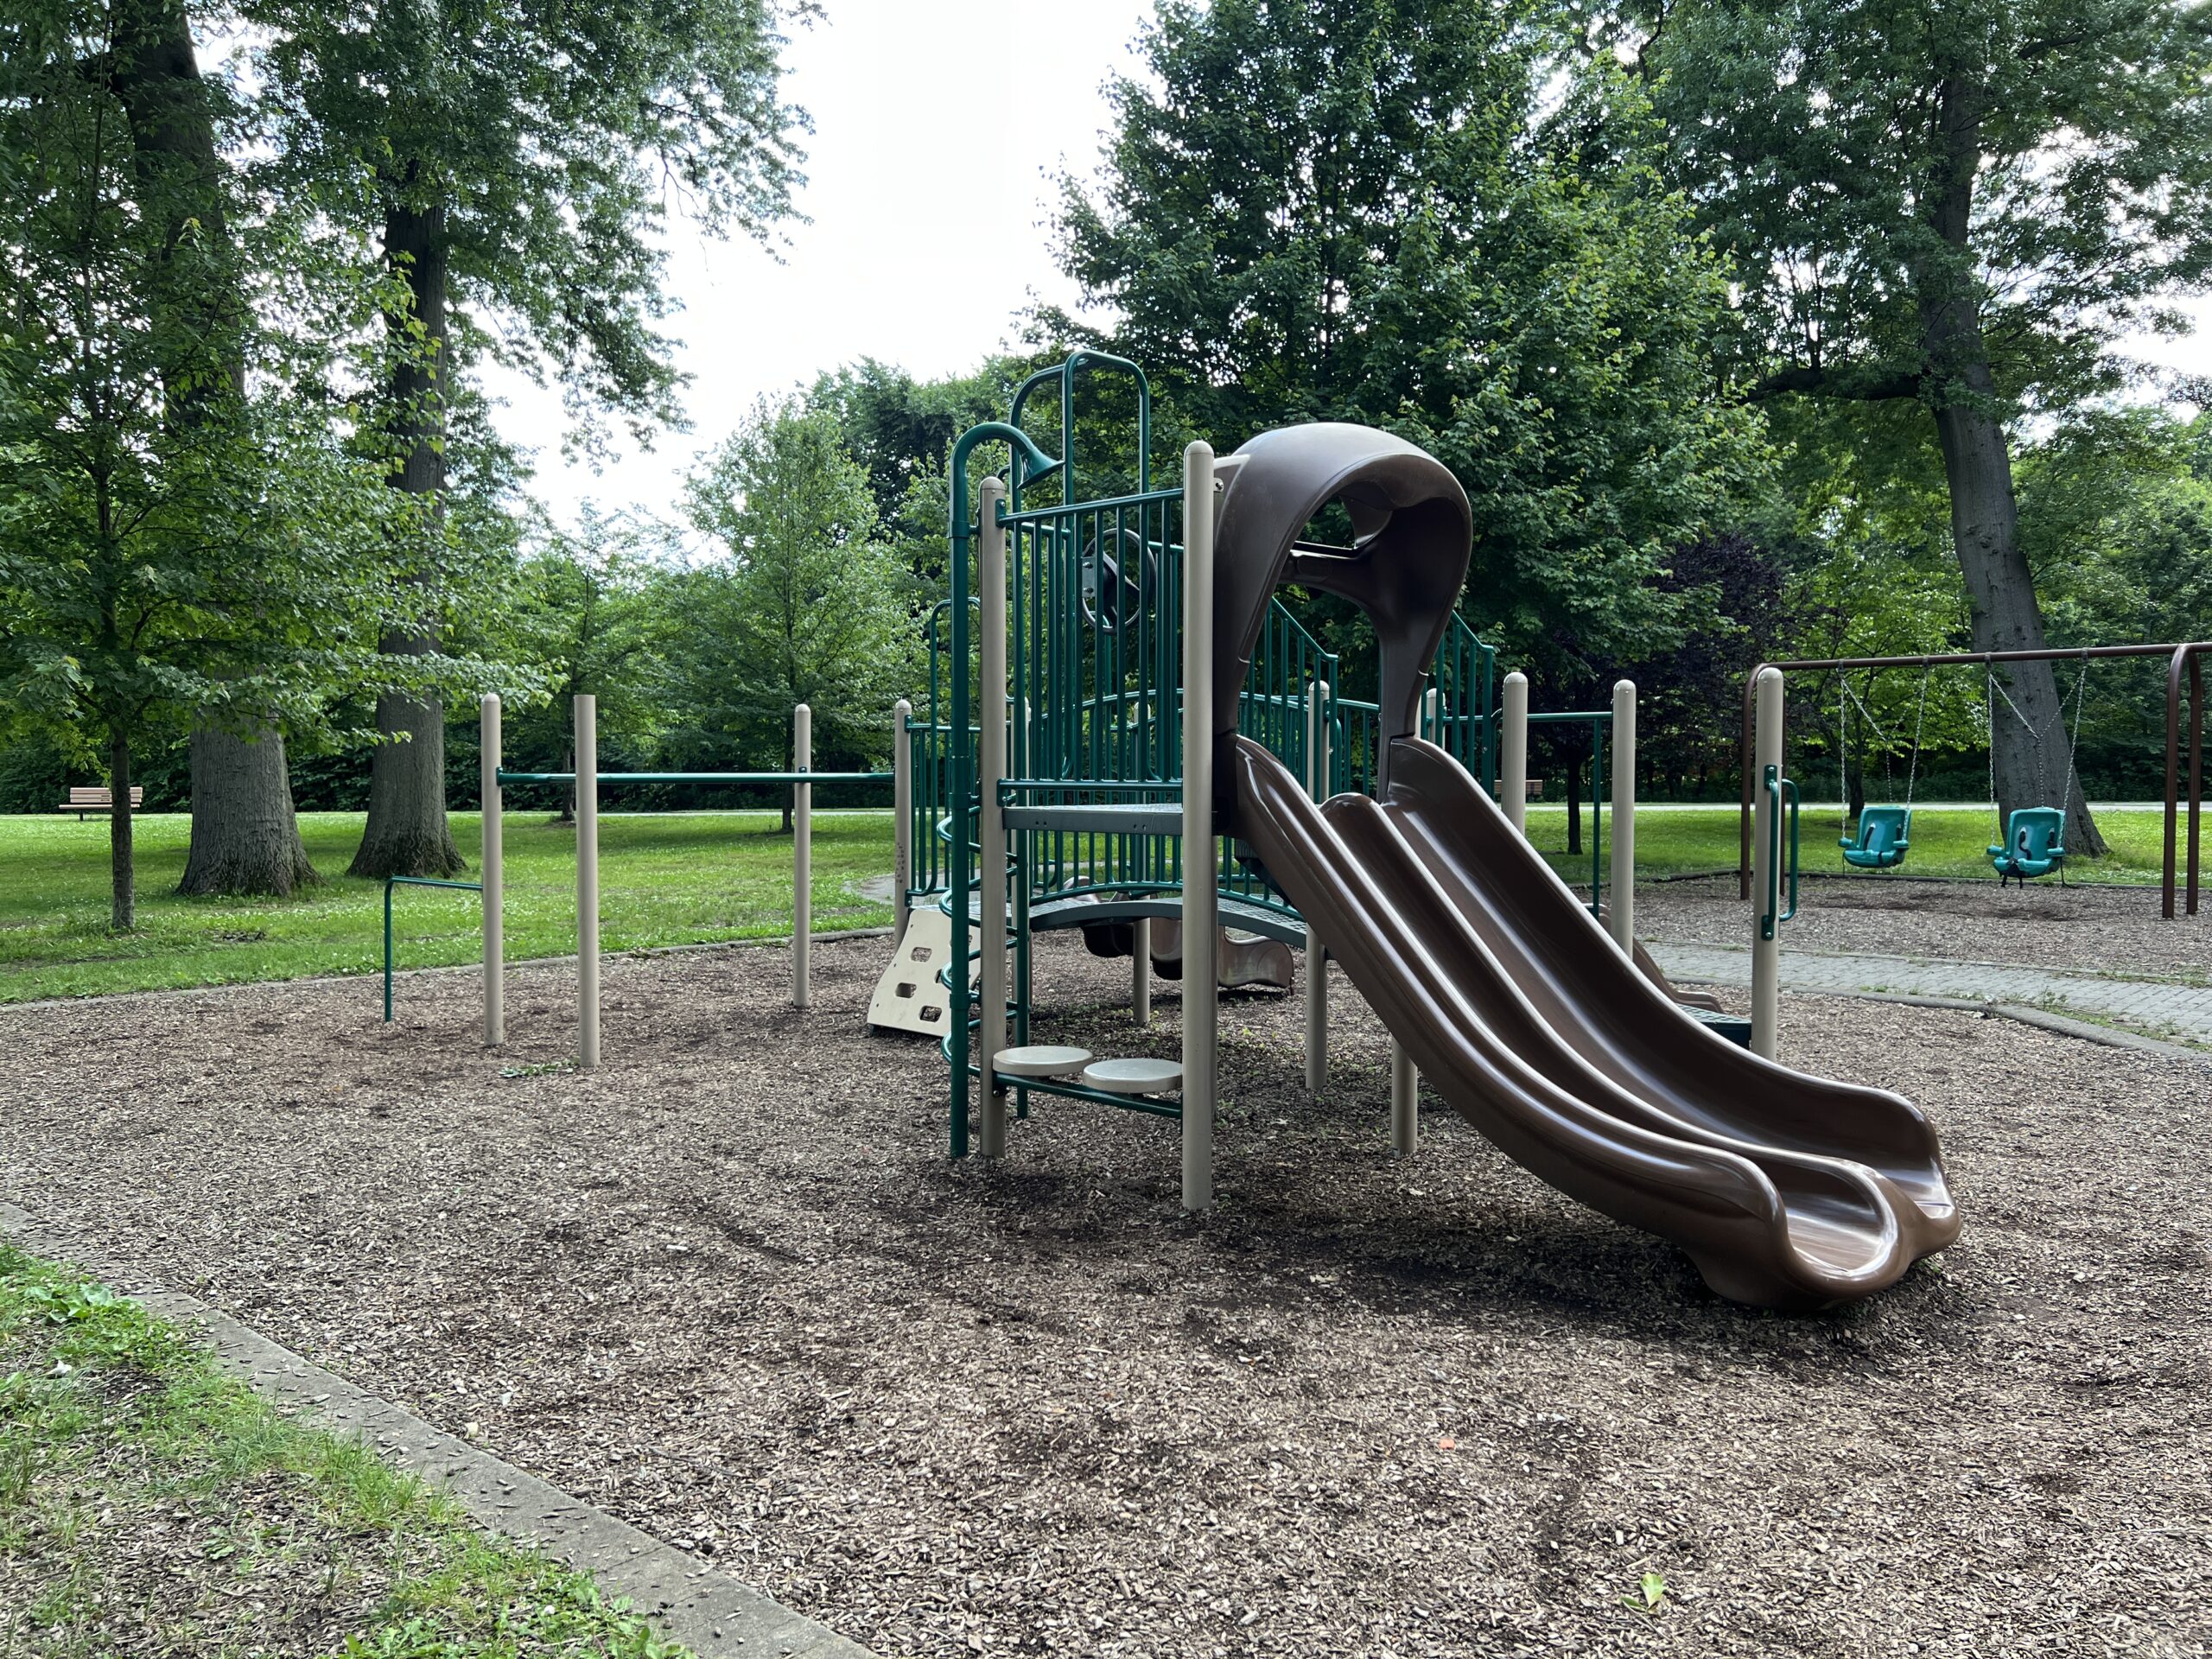 Saddle River County Park Playground in Rochelle Park NJ - WIDE image - Tot Lot SLIDE view